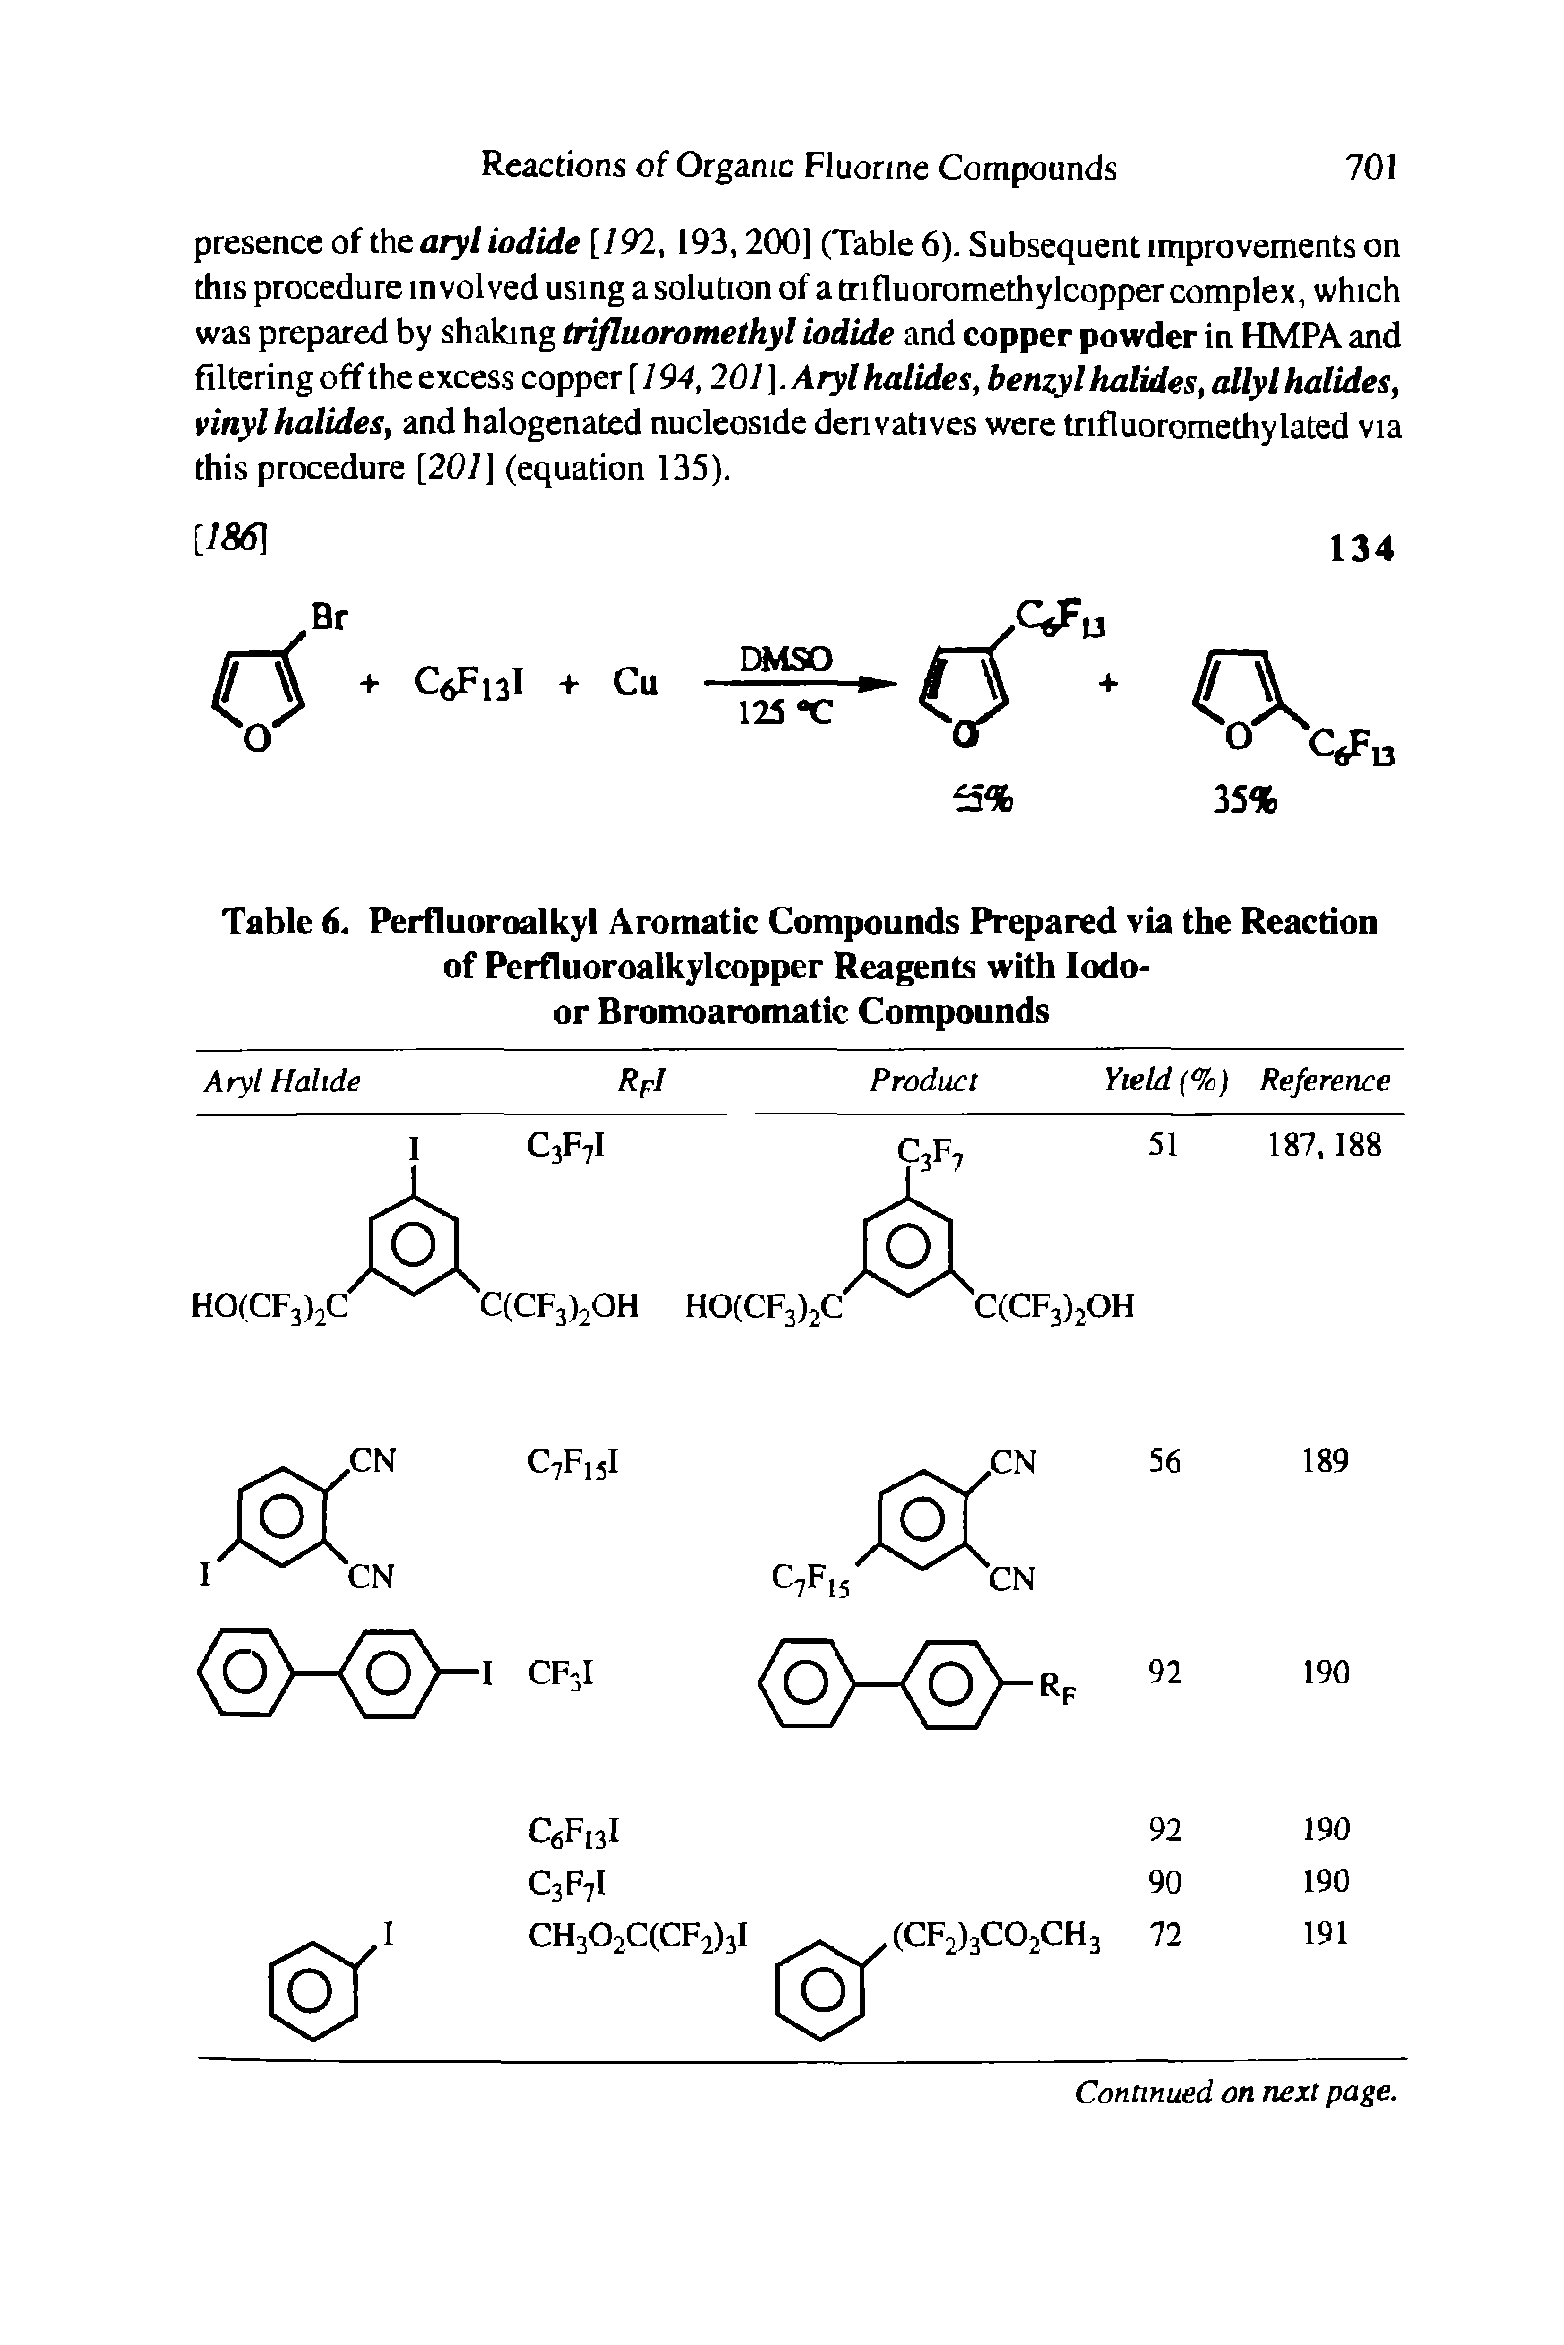 Table 6, Perfluoroalkyl Aromatic Compounds Prepared via the Reaction of Perfluoroalkylcopper Reagents with lodo-or Bromoaromatic Compounds...